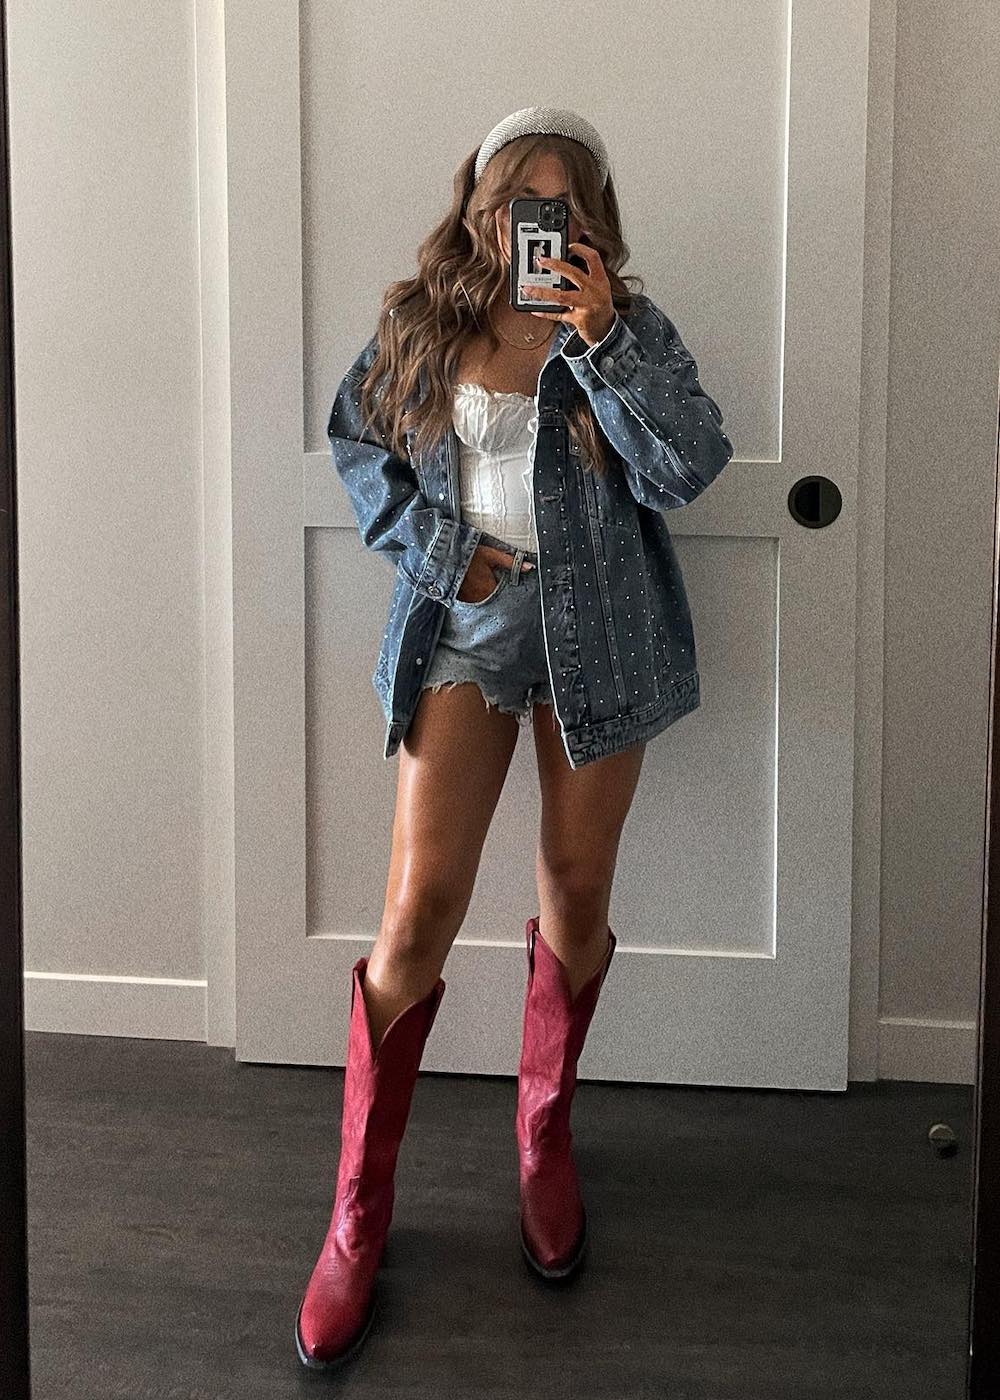 woman wearing a country concert outfit with an oversized jewelled denim jacket, white top, denim shorts, and red cowboy boots